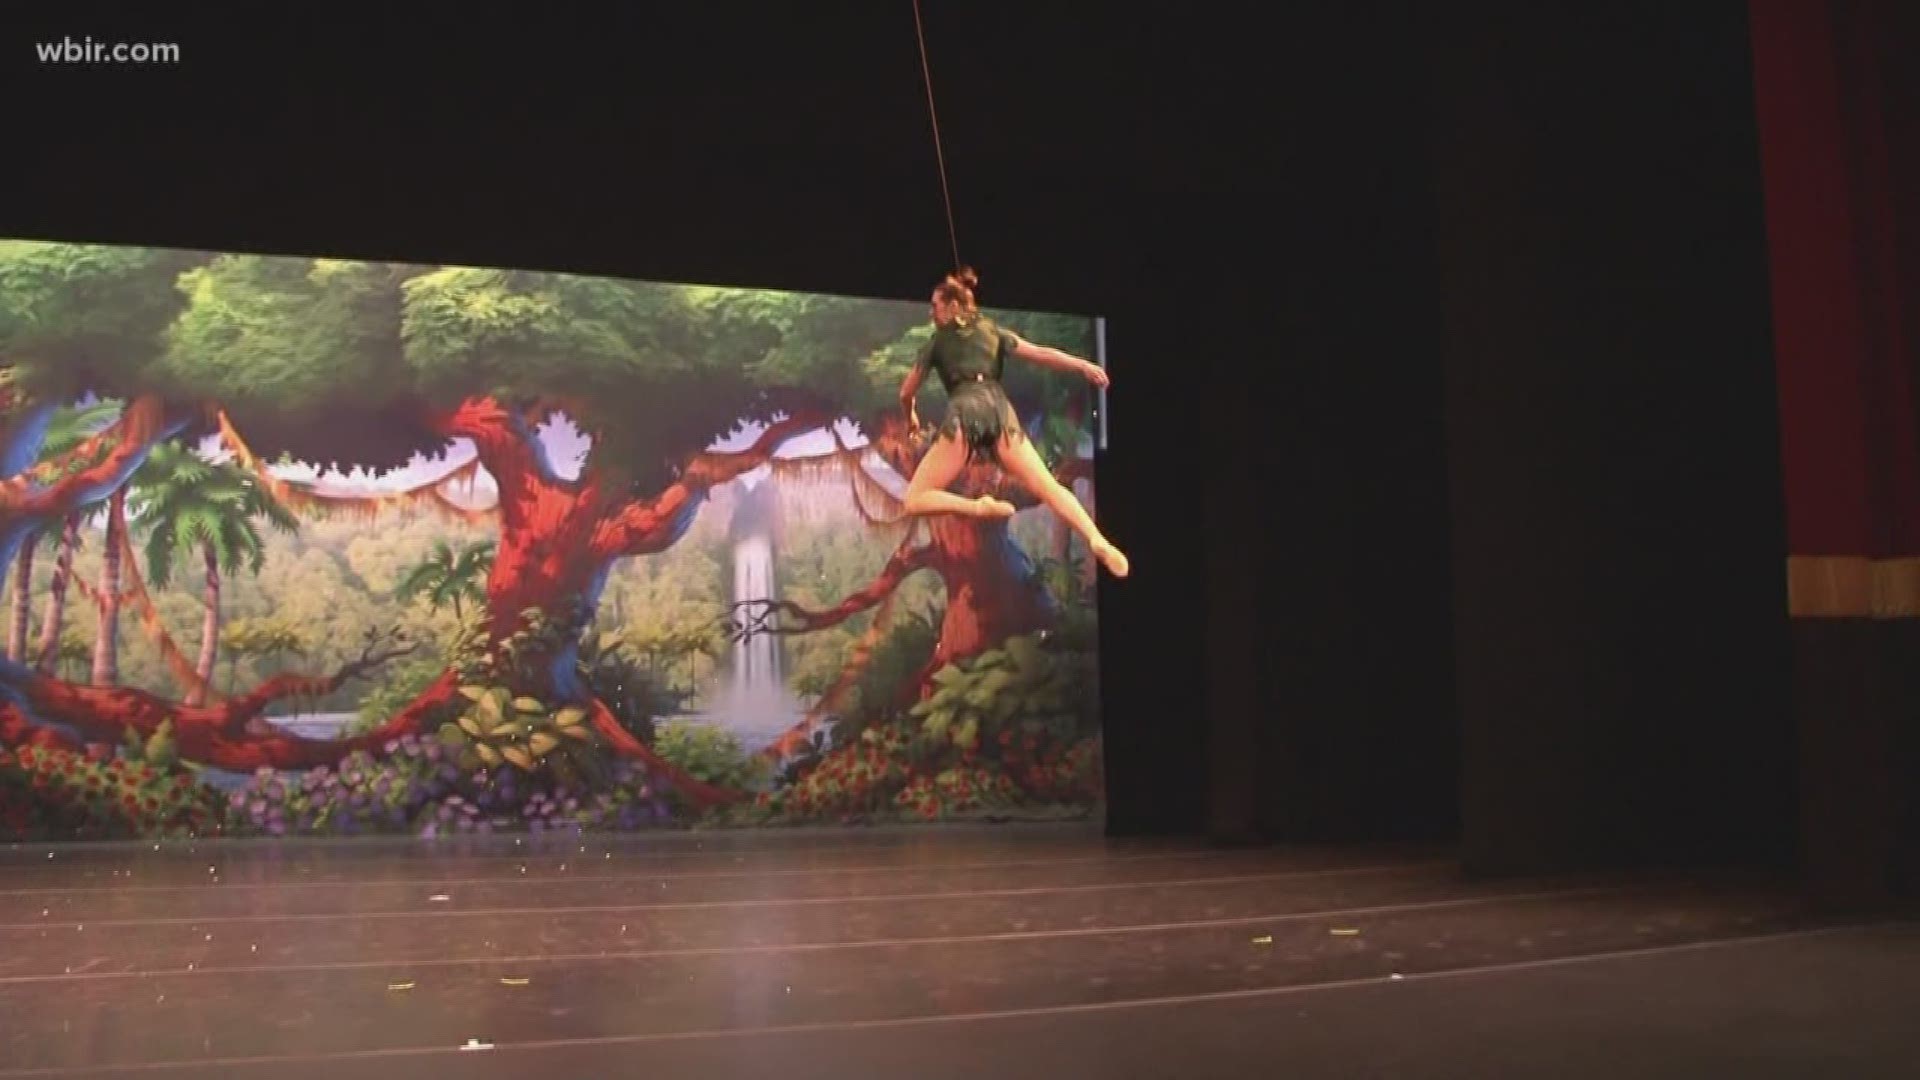 The Appalachian Ballet Company performs "Peter Pan" at the Clayton Center for the Arts March 23 at 7:30 and March 24 at 3:00